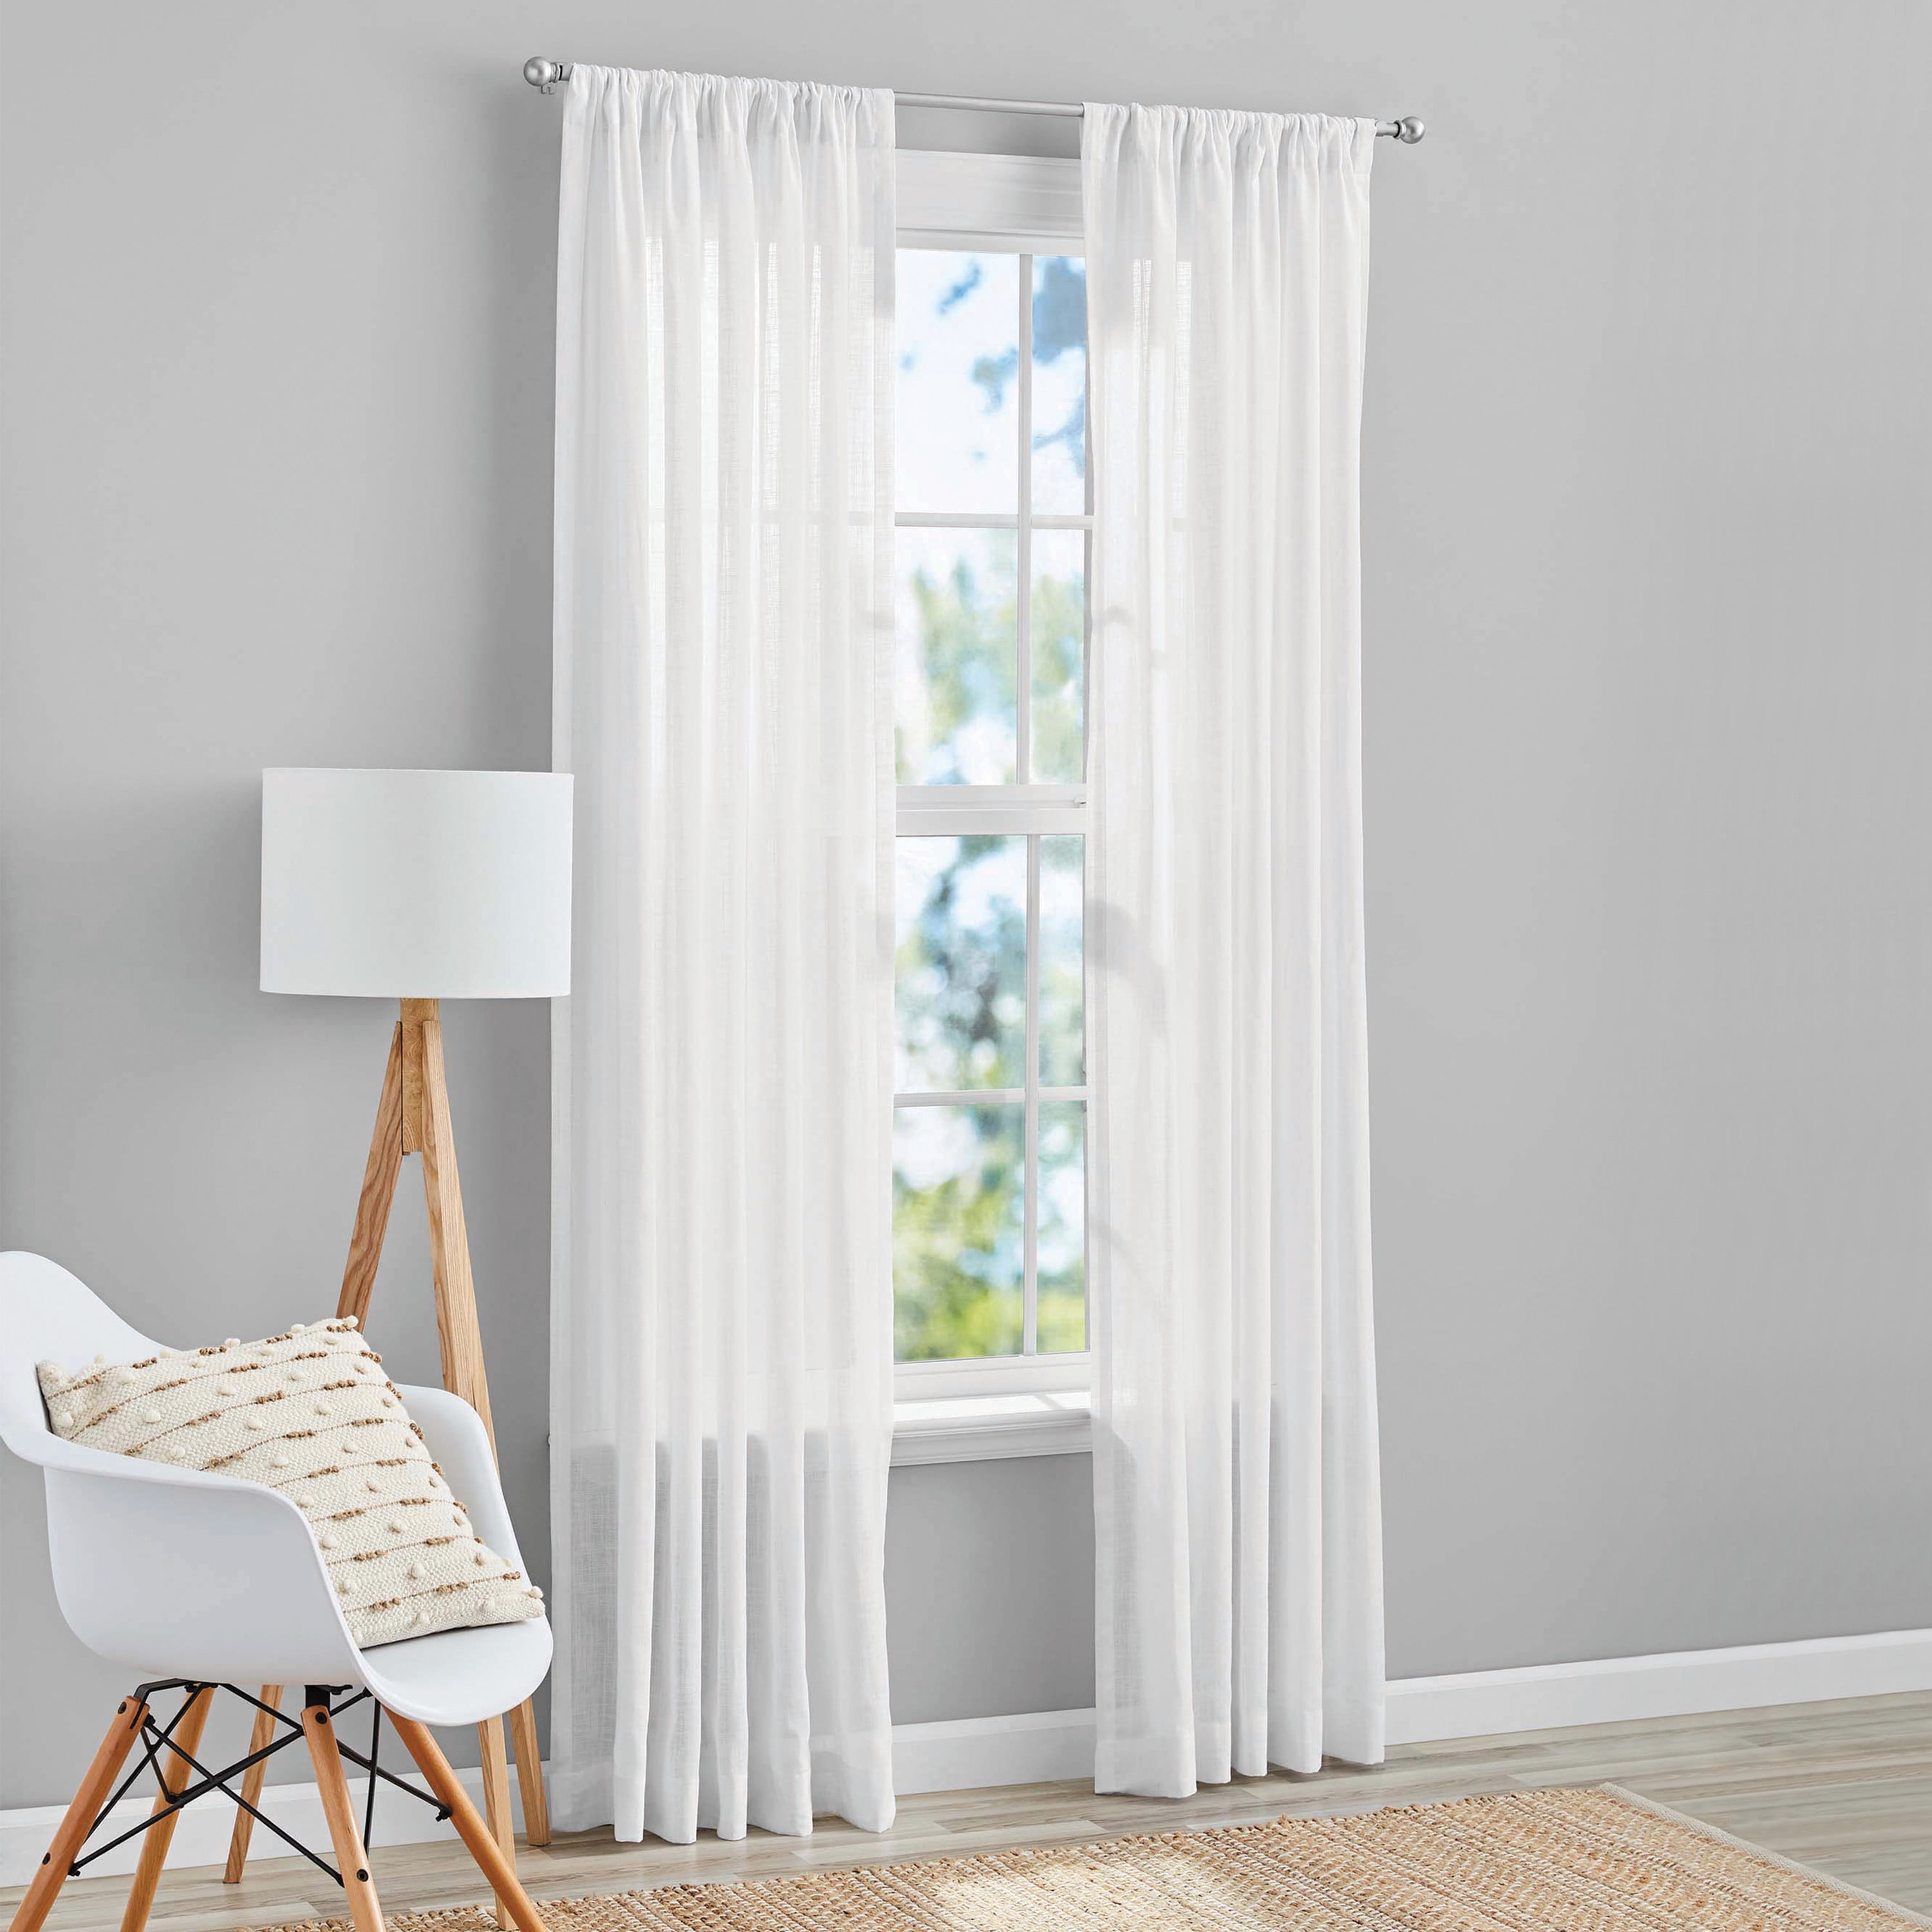 LUXURY DECORATIVE WINDOW CURTAINS FOR BABY ROOM 100% COTTON! 